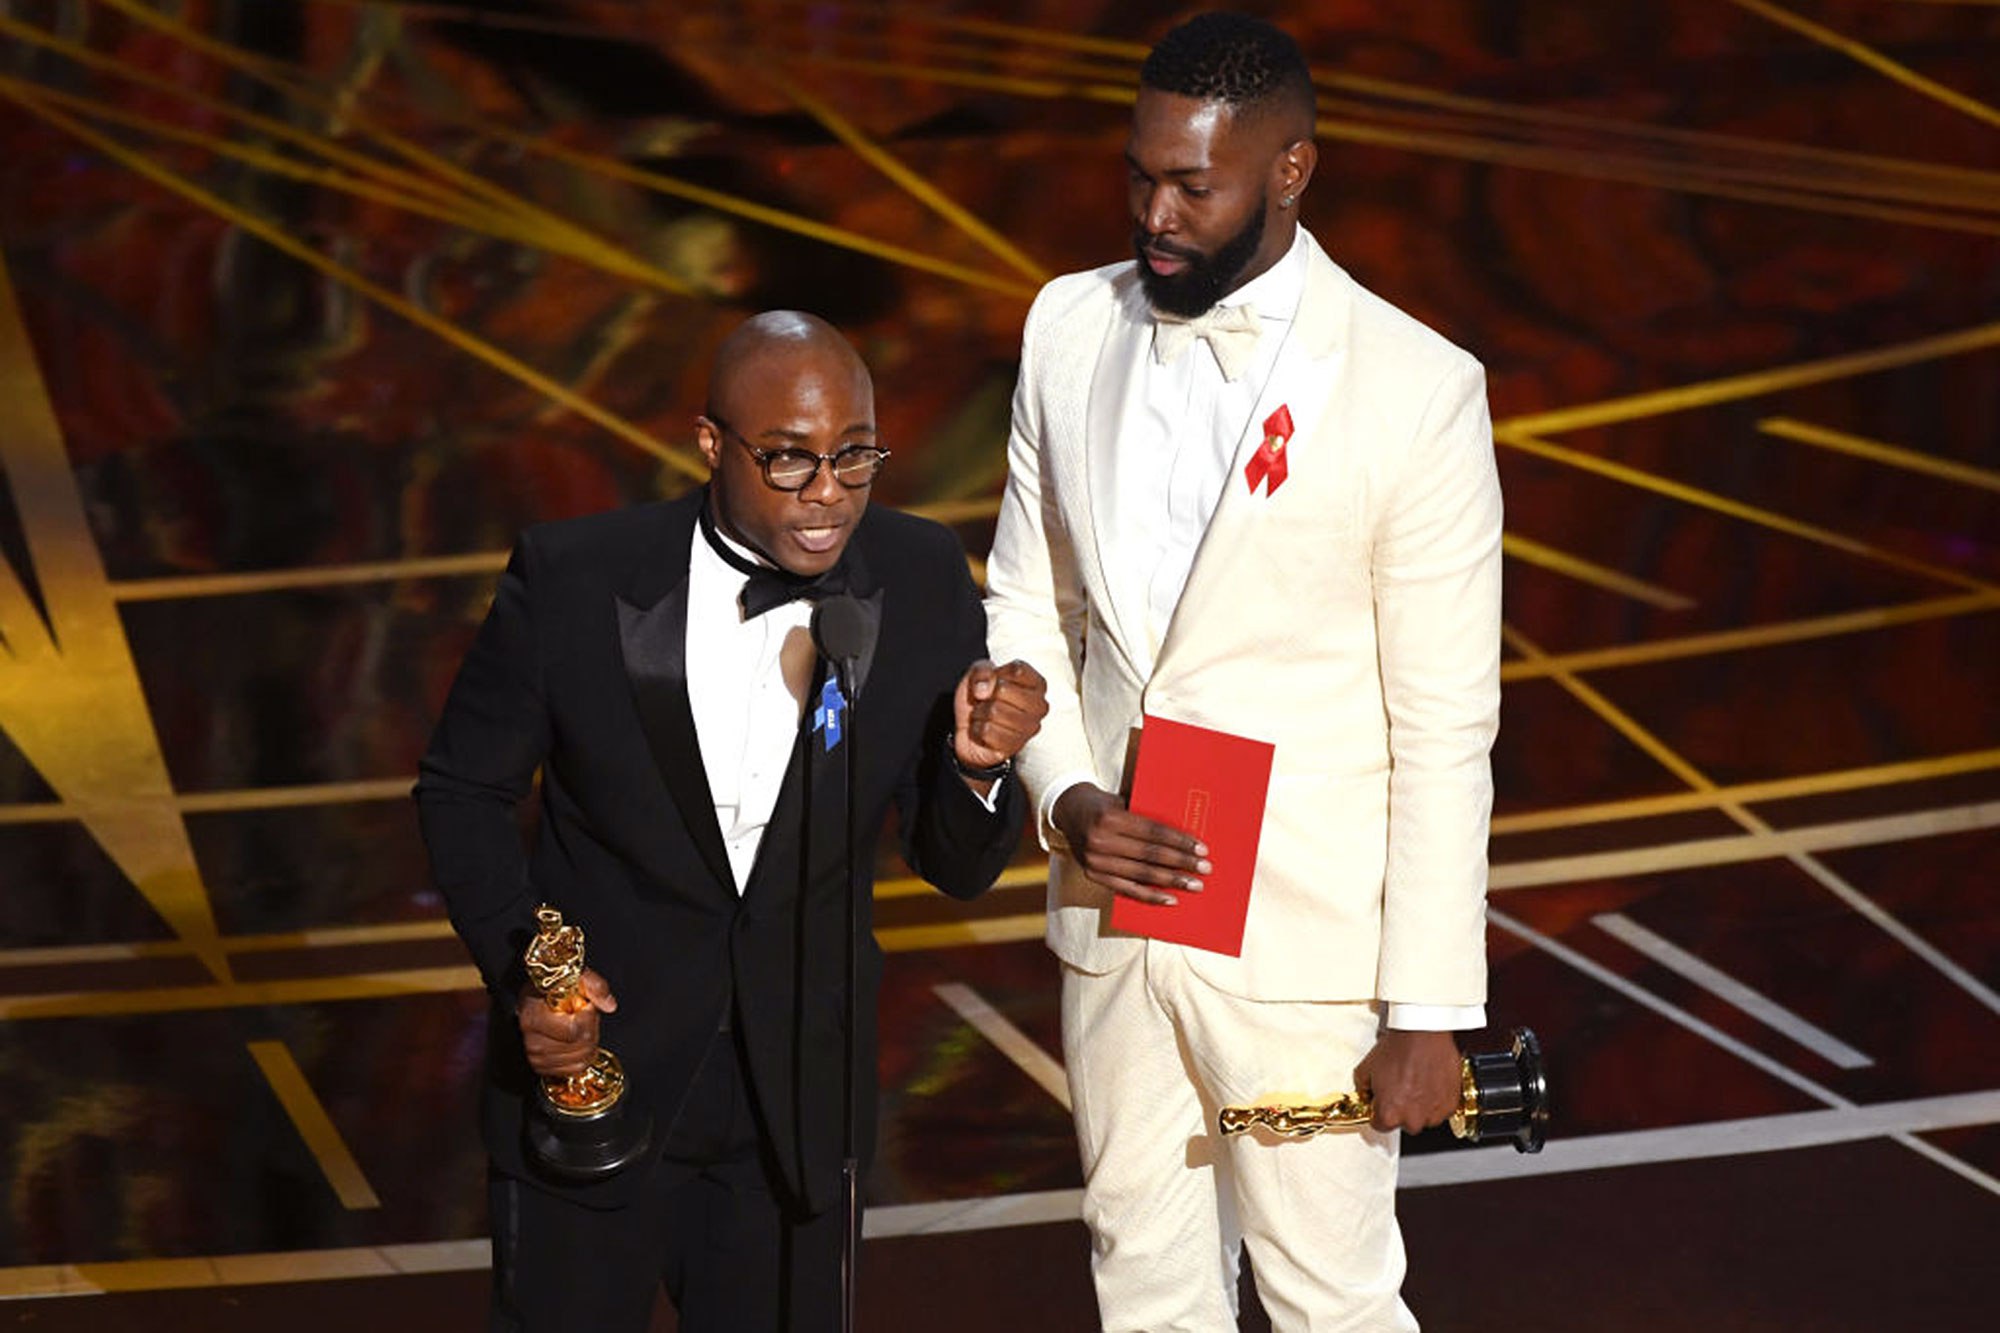 HOLLYWOOD, CA - FEBRUARY 26: Writer/director Barry Jenkins (L) and writer Tarell Alvin McCraney accept Best Adapted Screenplay for 'Moonlight' onstage during the 89th Annual Academy Awards at Hollywood & Highland Center on February 26, 2017 in Hollywood, California. (Photo by Kevin Winter/Getty Images)